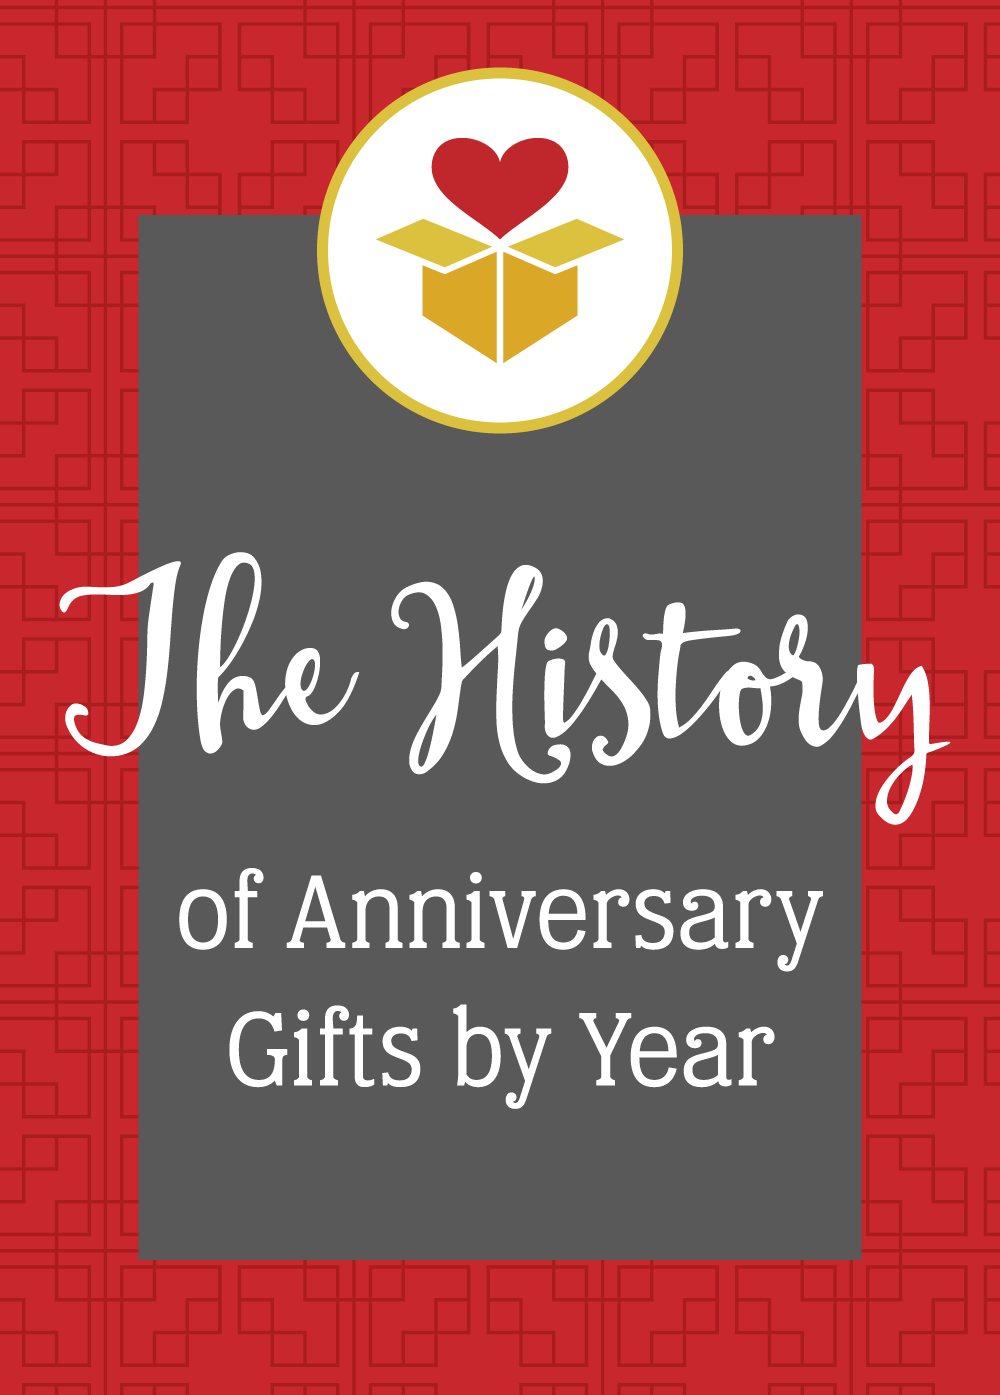 Marriage :: Wedding Anniversary Gifts - Traditional and Modern... by  elizabethlopez763 - Issuu